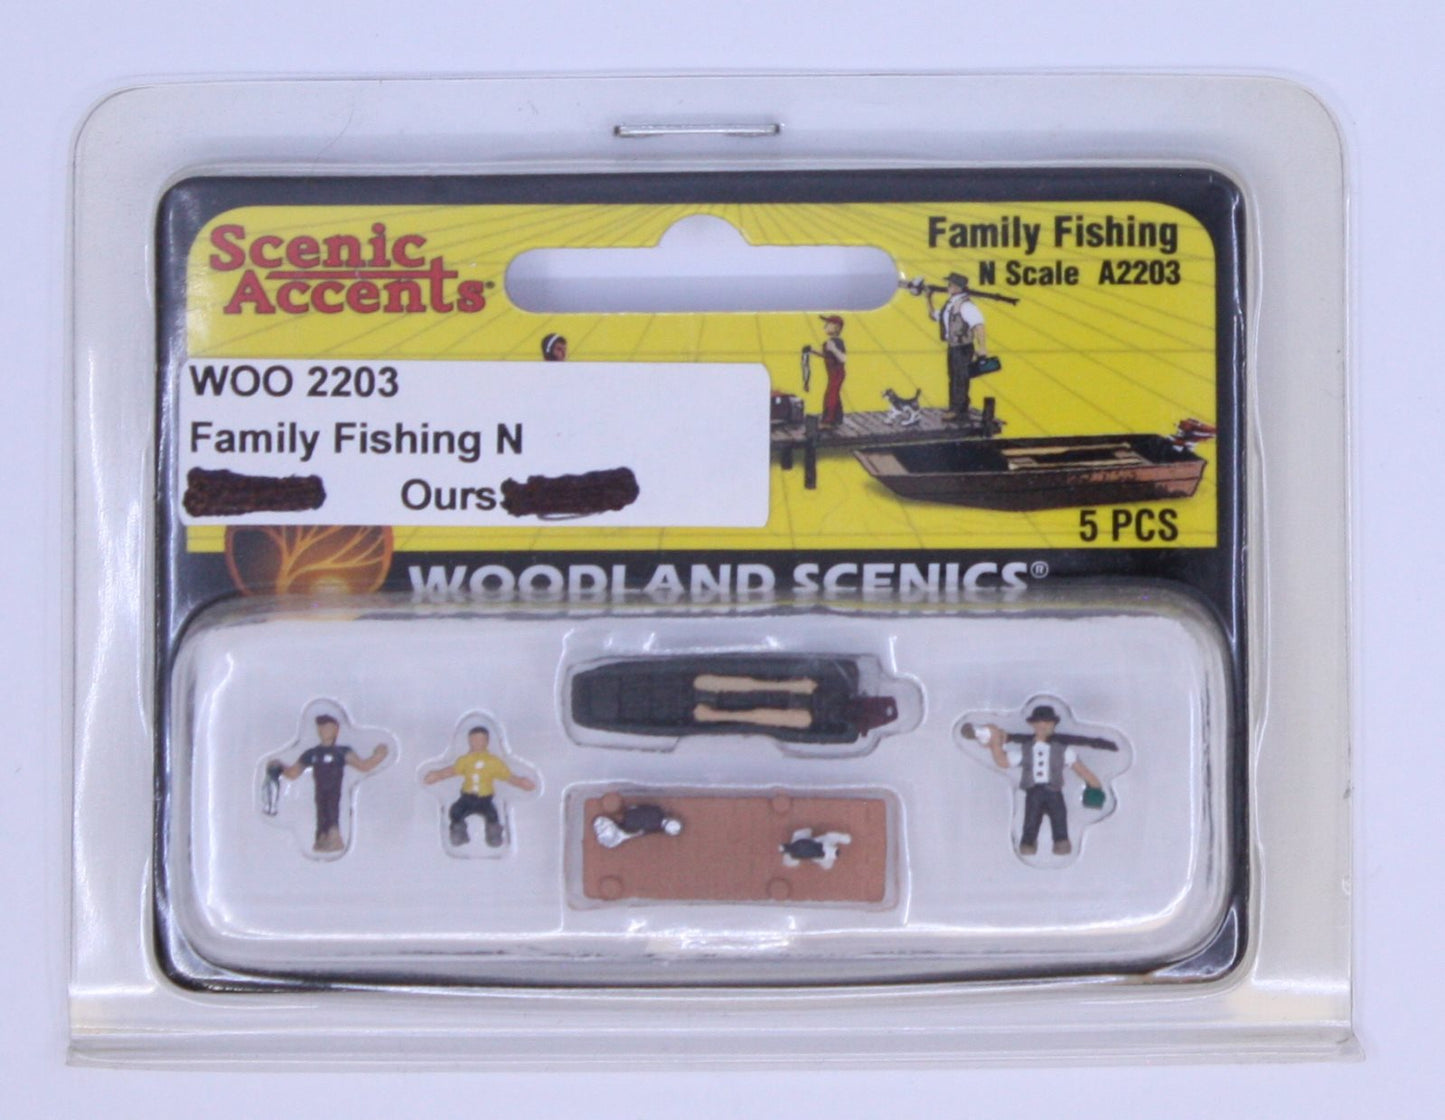 Woodland Scenics A2203 N Scenic Accents Family Fishing Figures